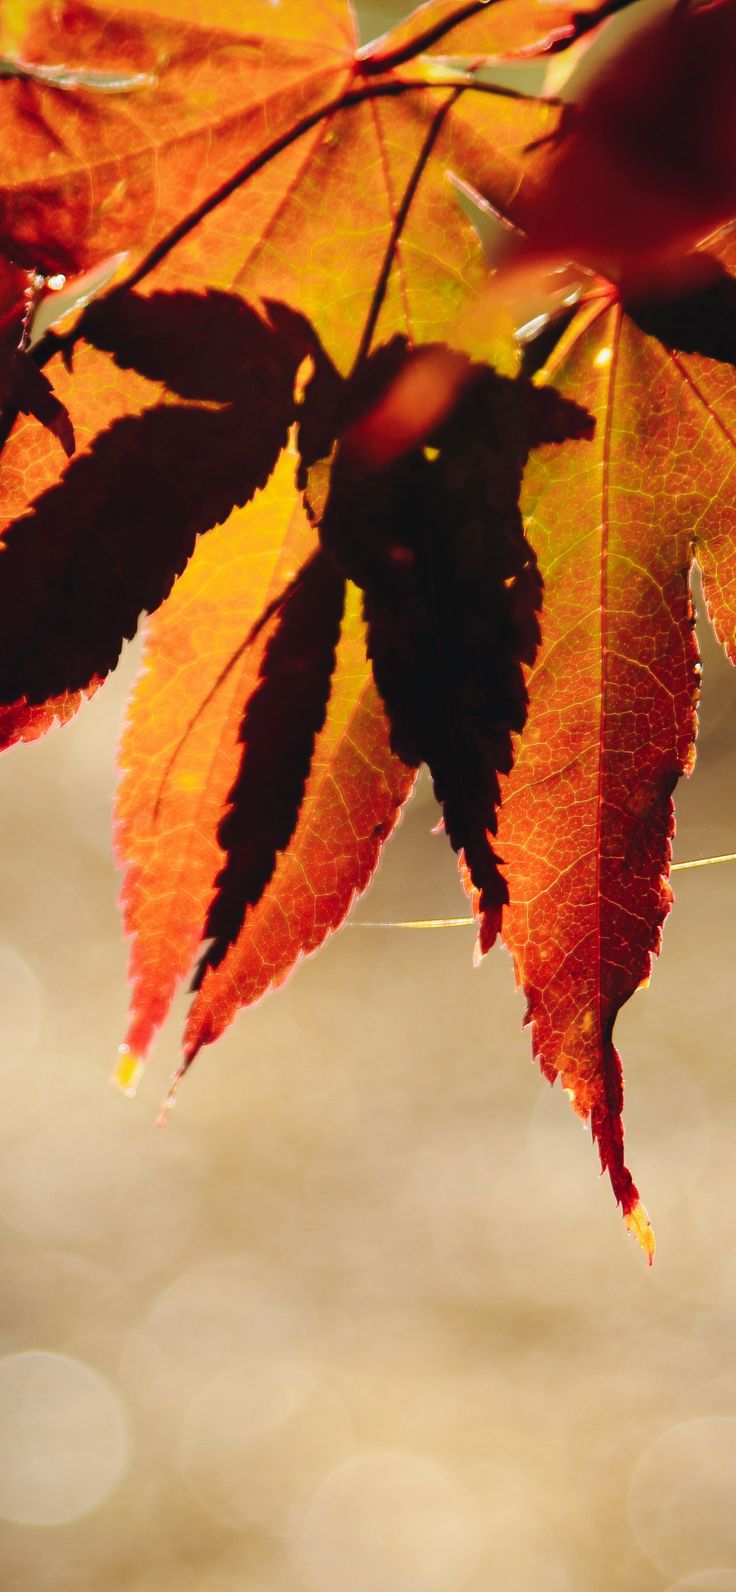 Autumn wallpaper for iPhone and iPad. iPhone wallpaper, iPhone wallpaper fall, Wallpaper